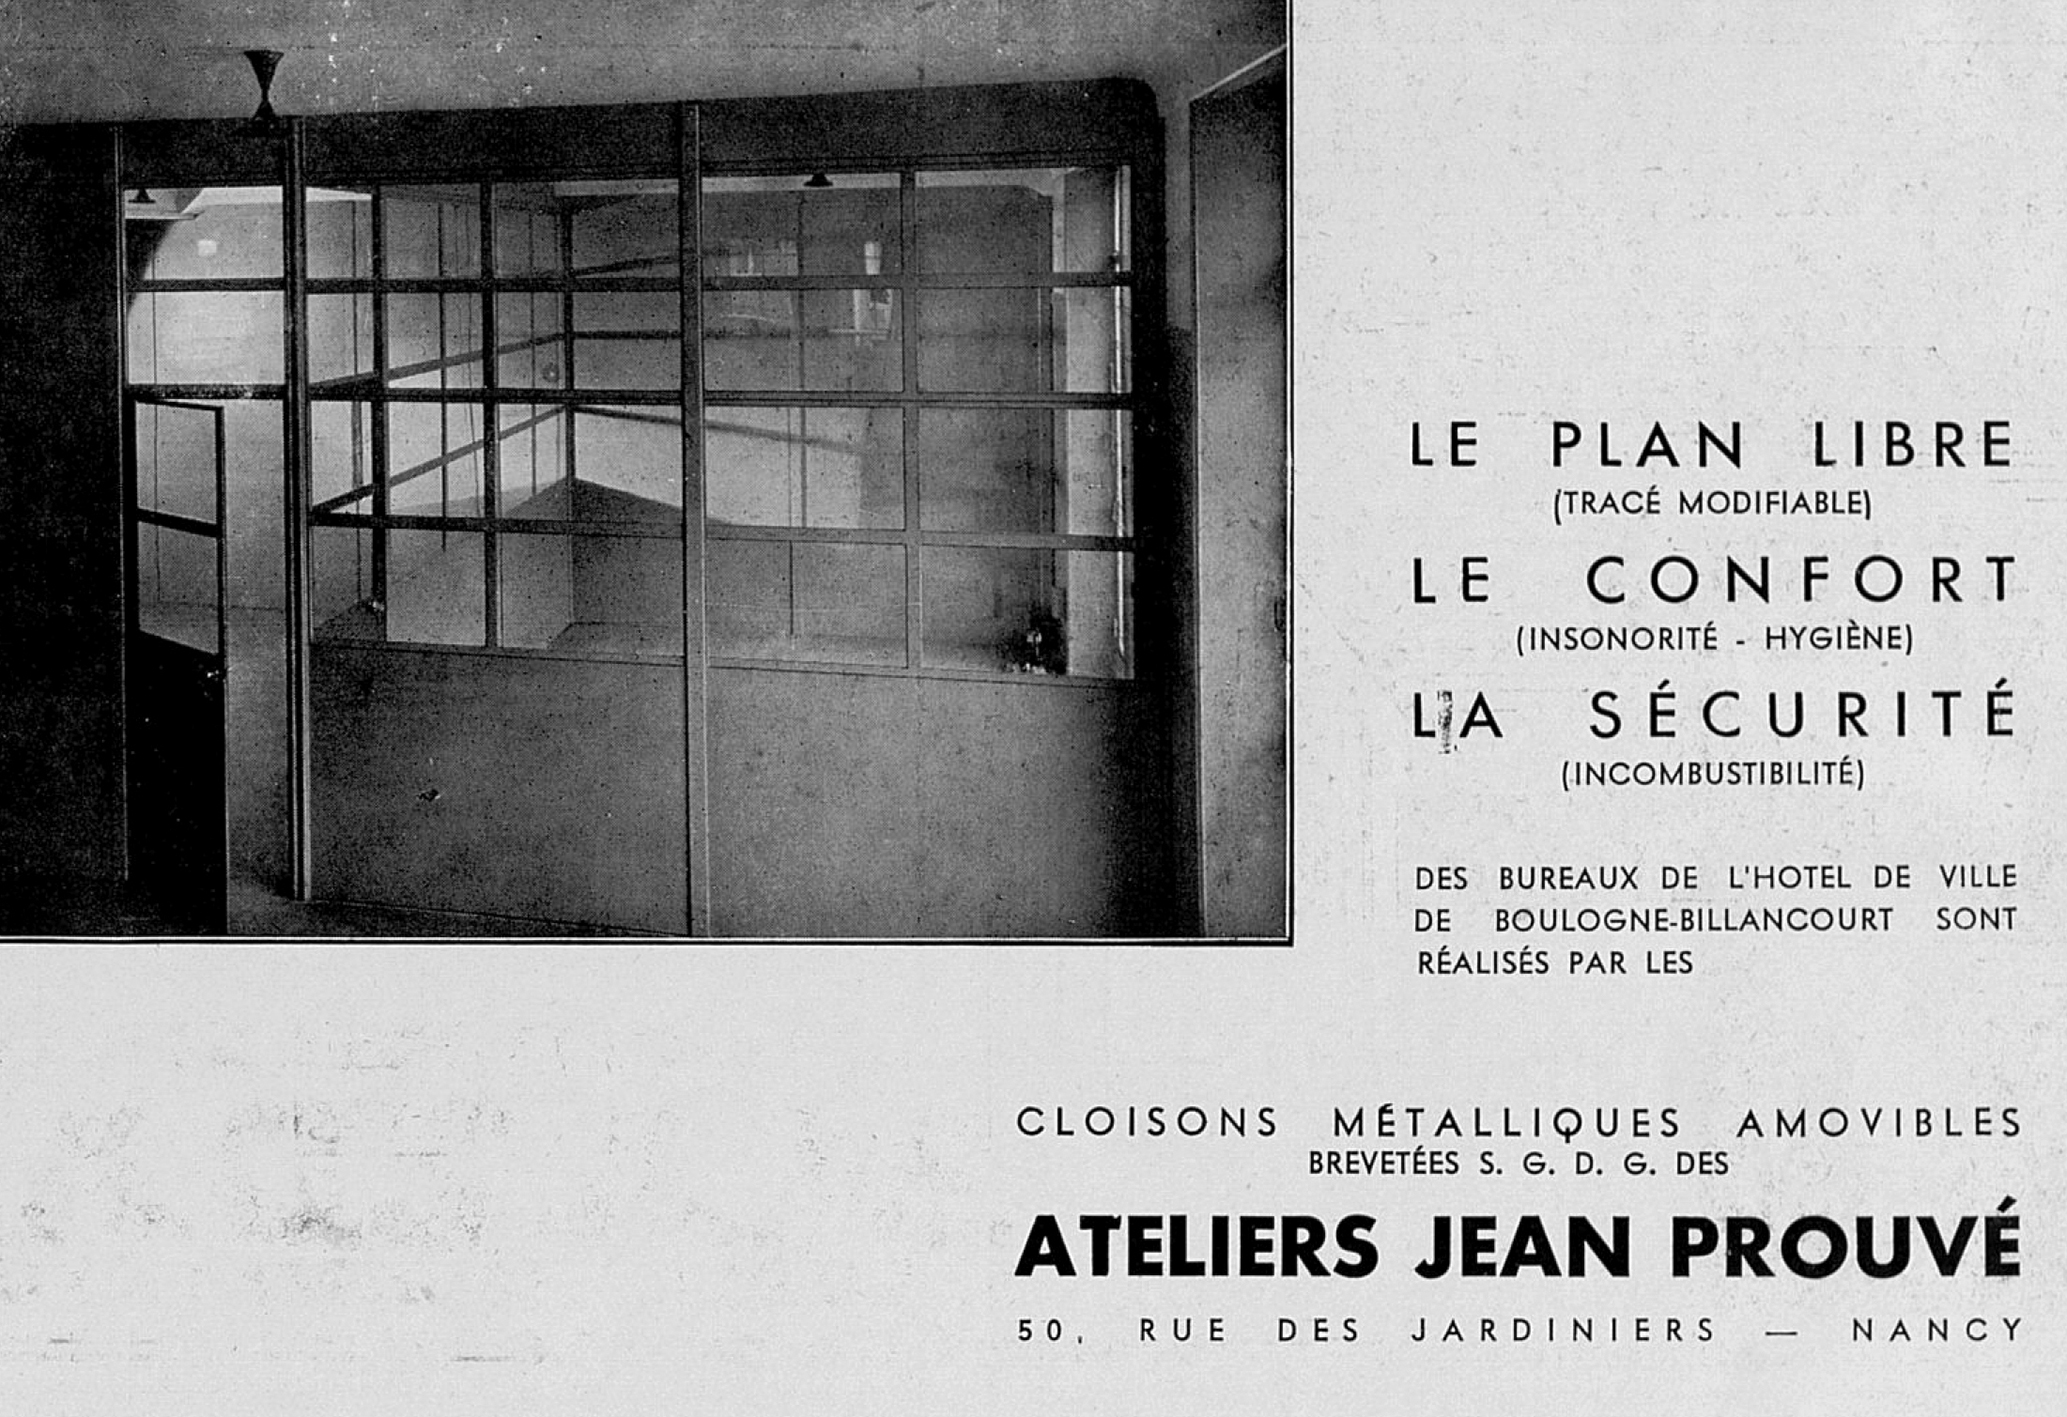 Advertisement from the Ateliers Jean Prouvé, in <i>L’Architecture d’aujourd’hui,</i> no. 8, 1934.